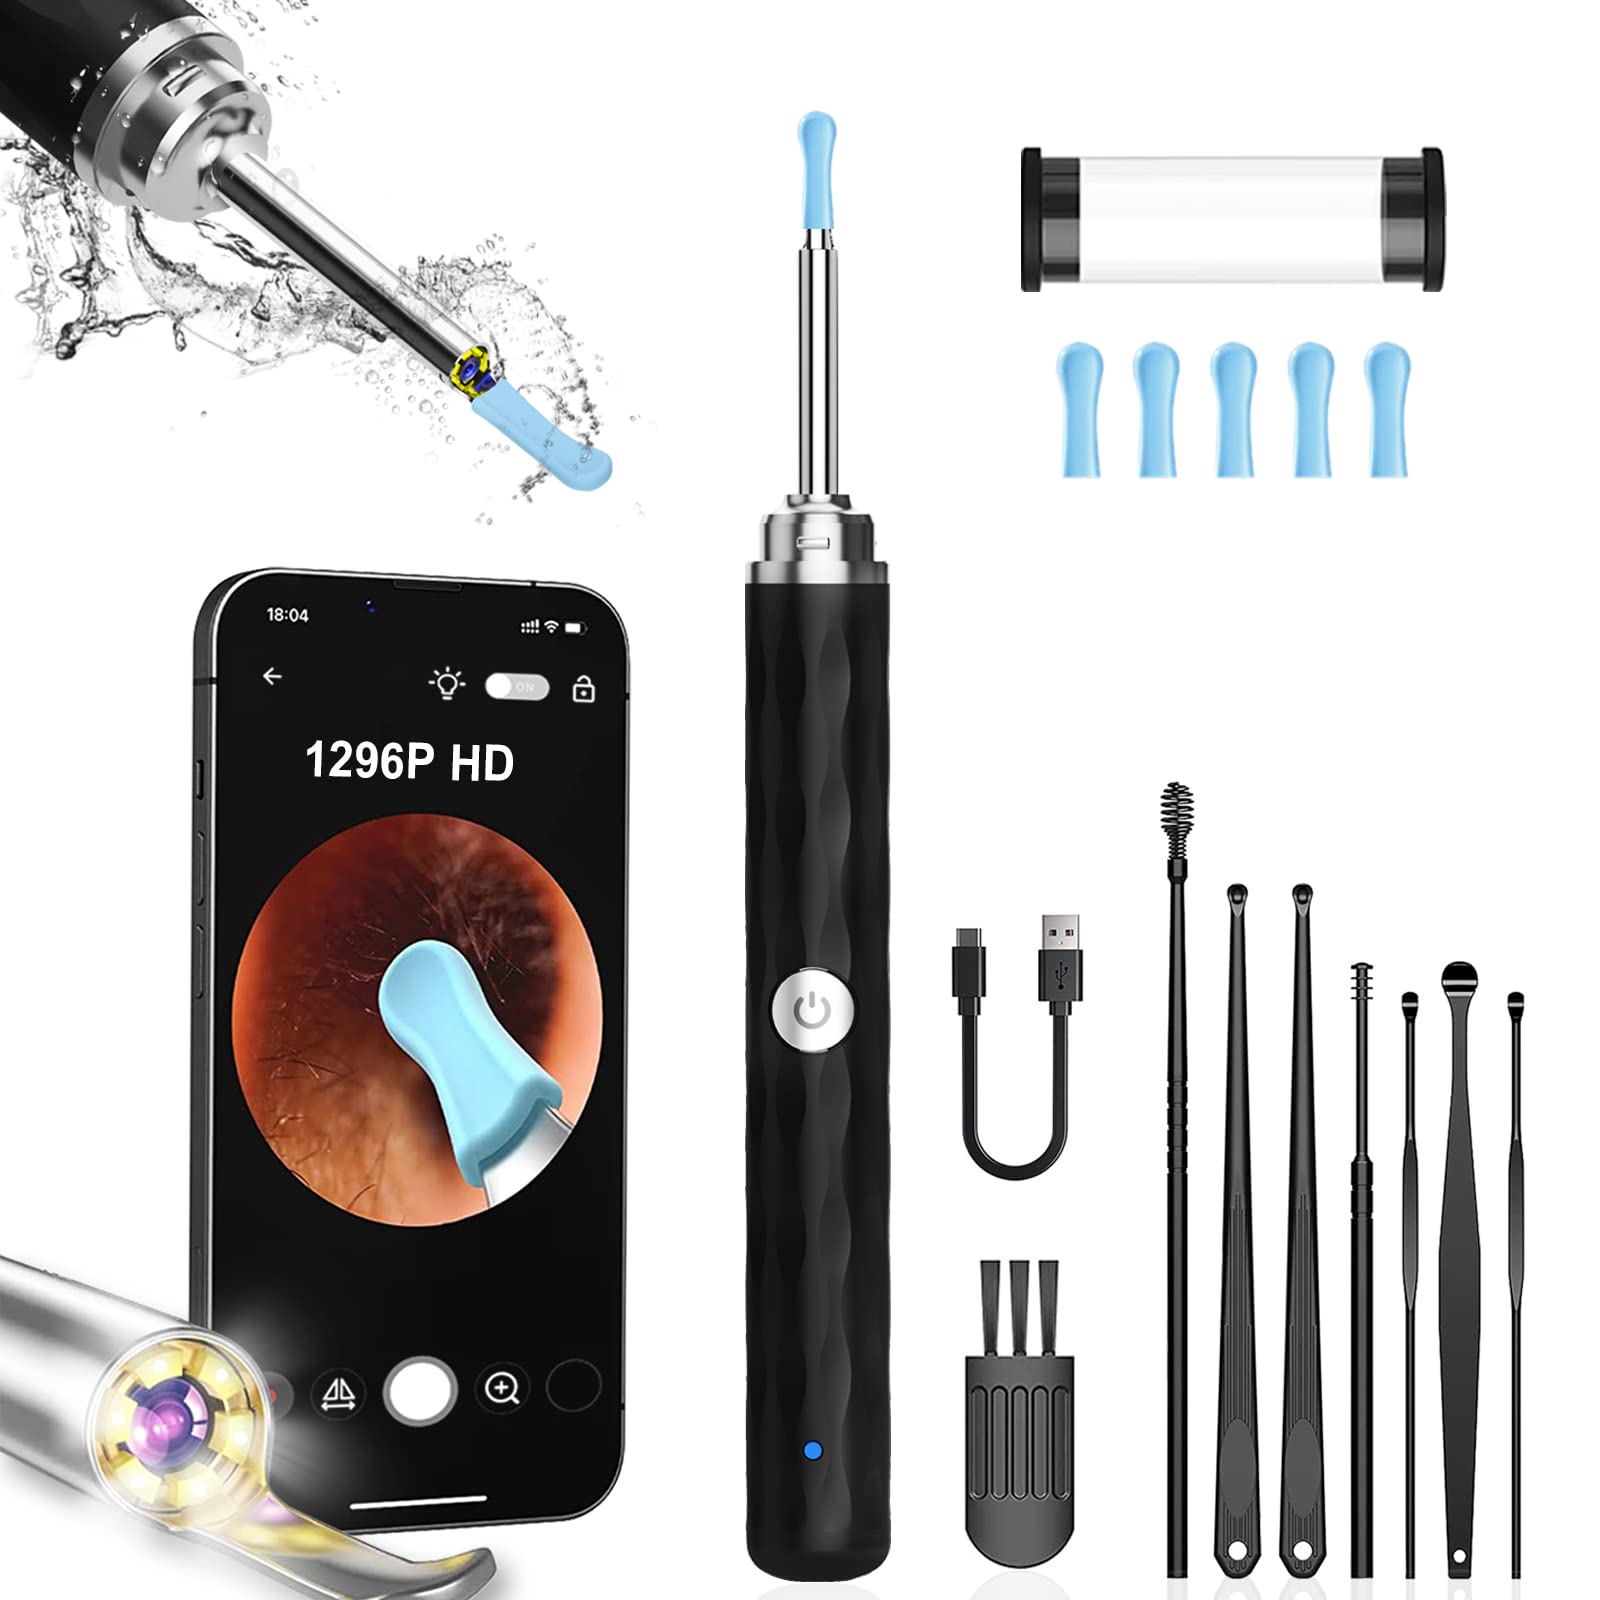 For US, Ear Wax Removal Camera, Ear Cleaner 1296P HD Camera, Ear